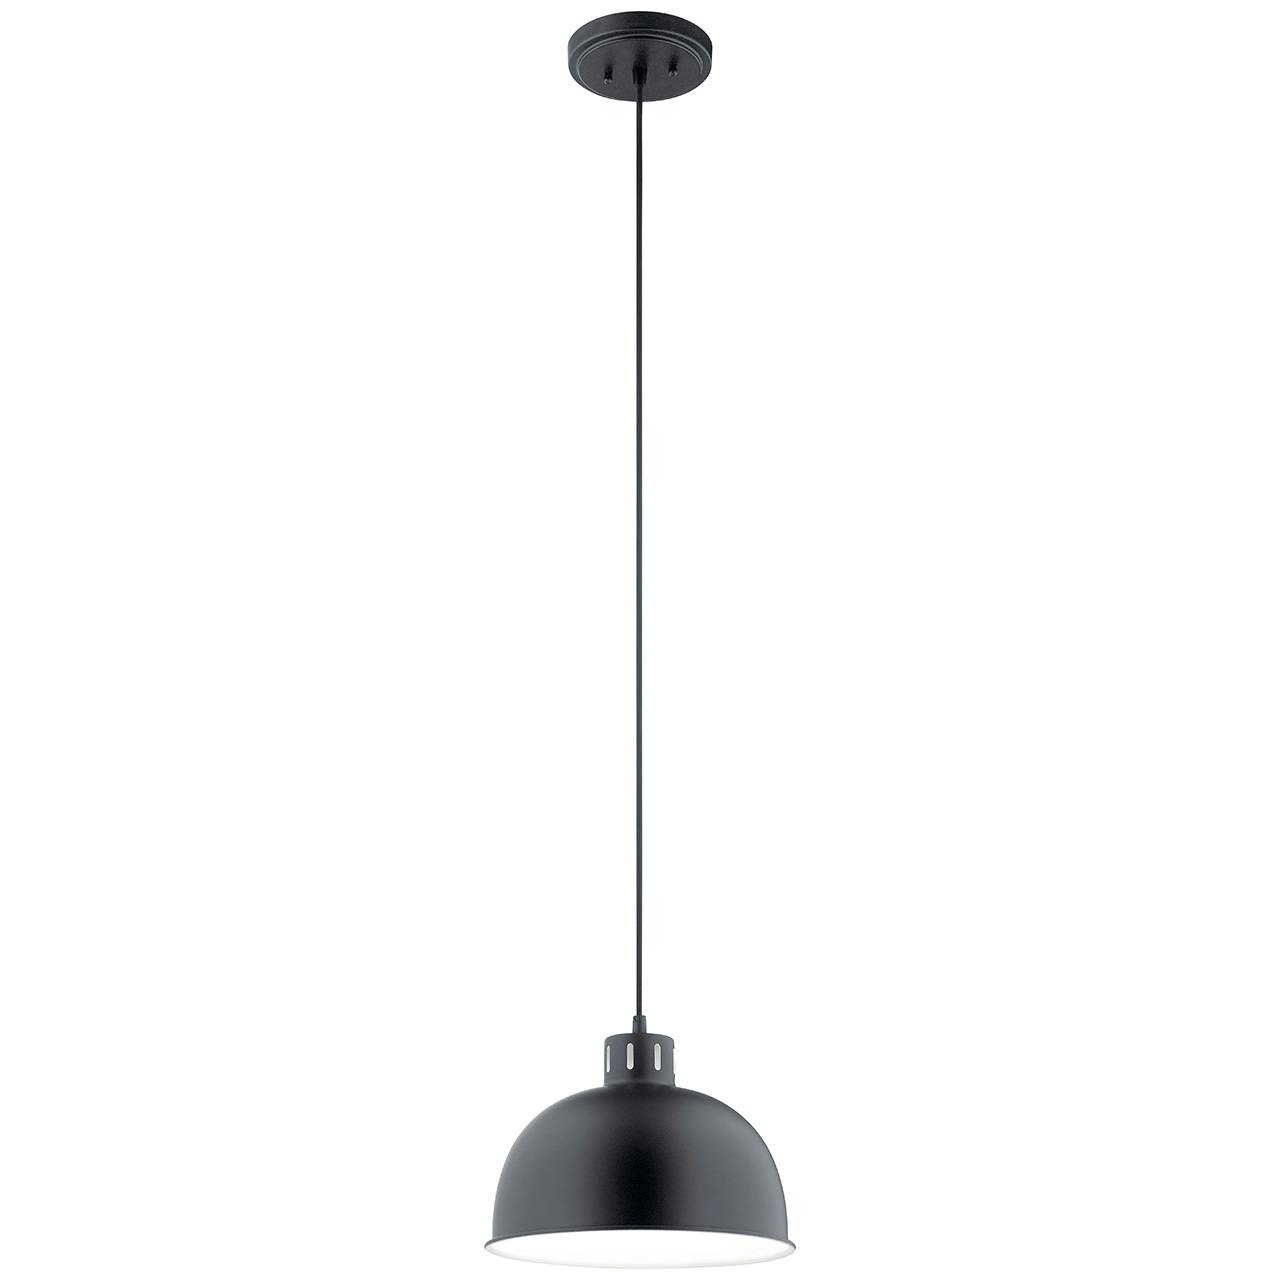 Zailey™ 9" 1 Light Pendant in Black on a white background